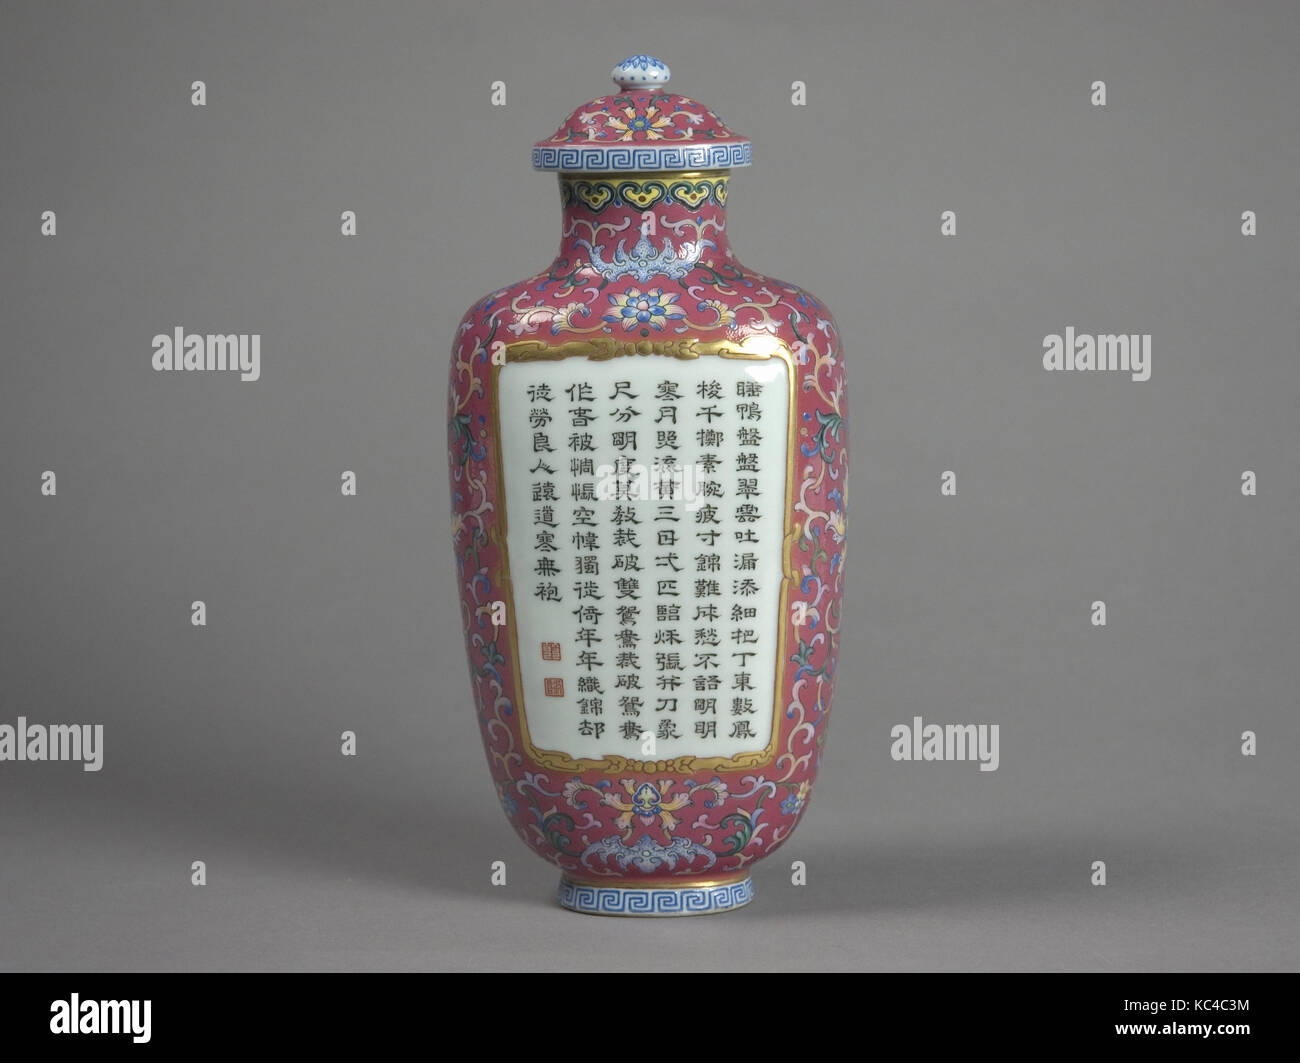 Vase with Poems Composed by the Qianlong Emperor, late 18th century Stock Photo